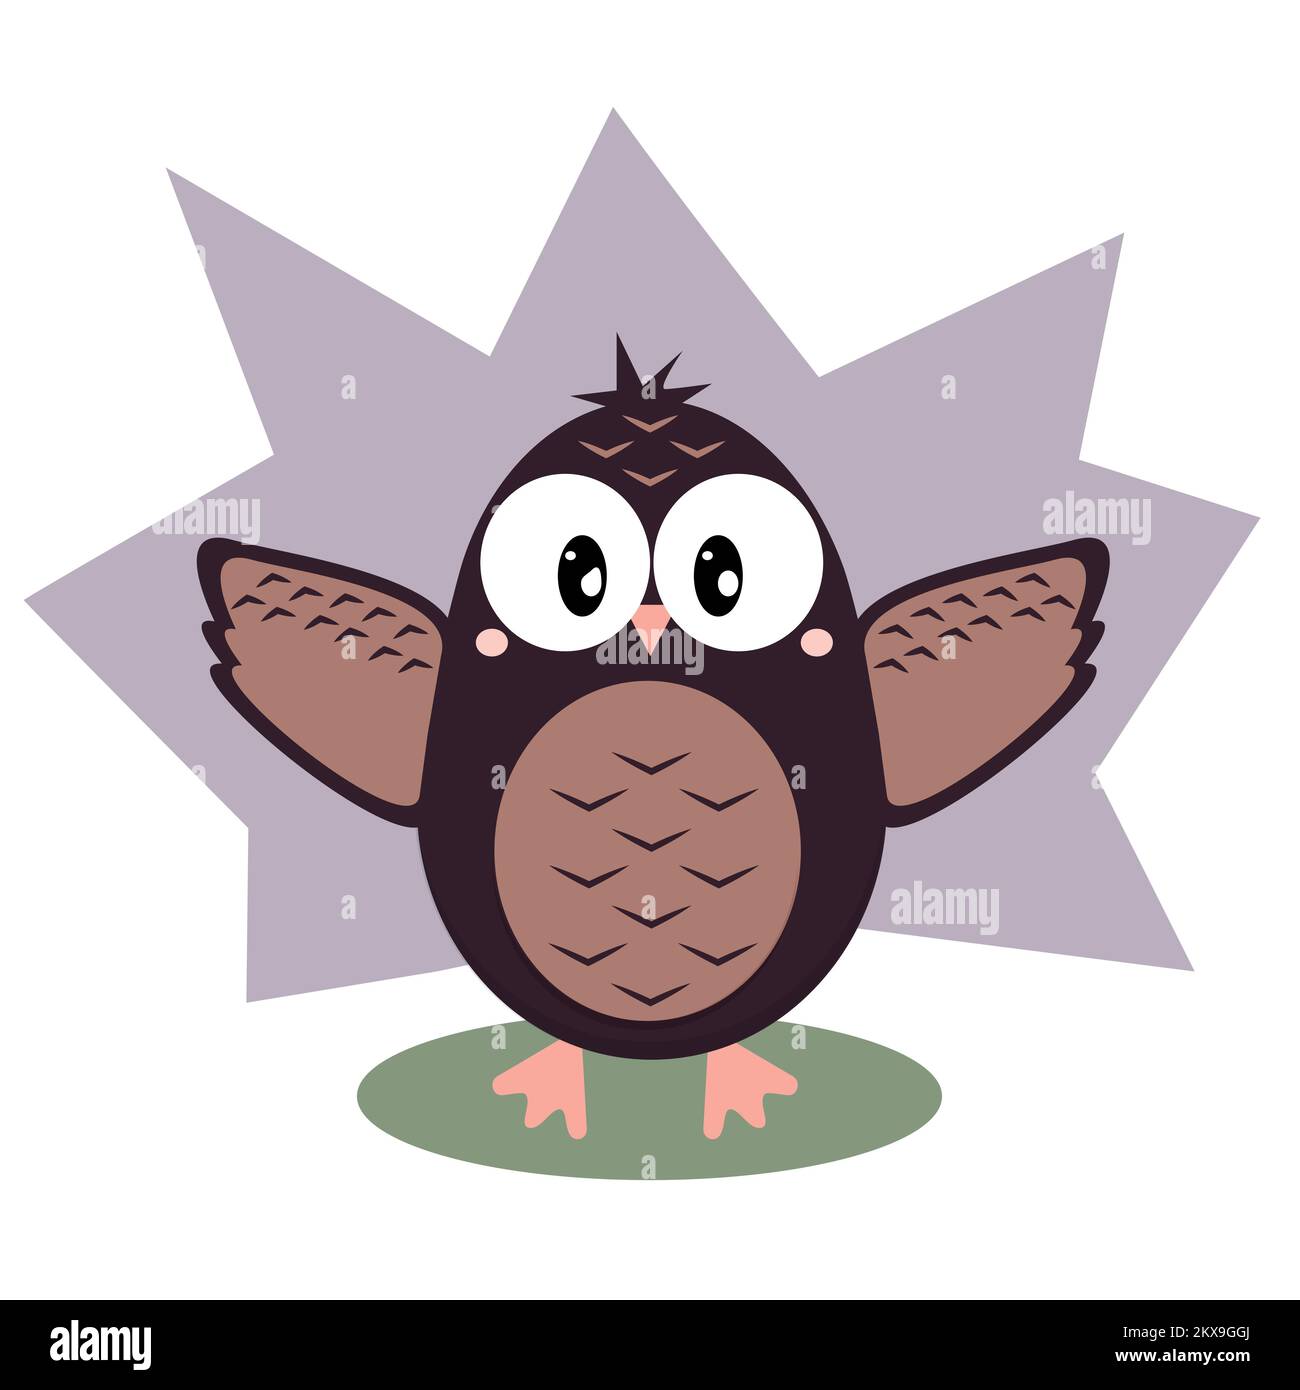 Funny owl with a bow tie flaps its wings. Vector flat style illustration Stock Vector